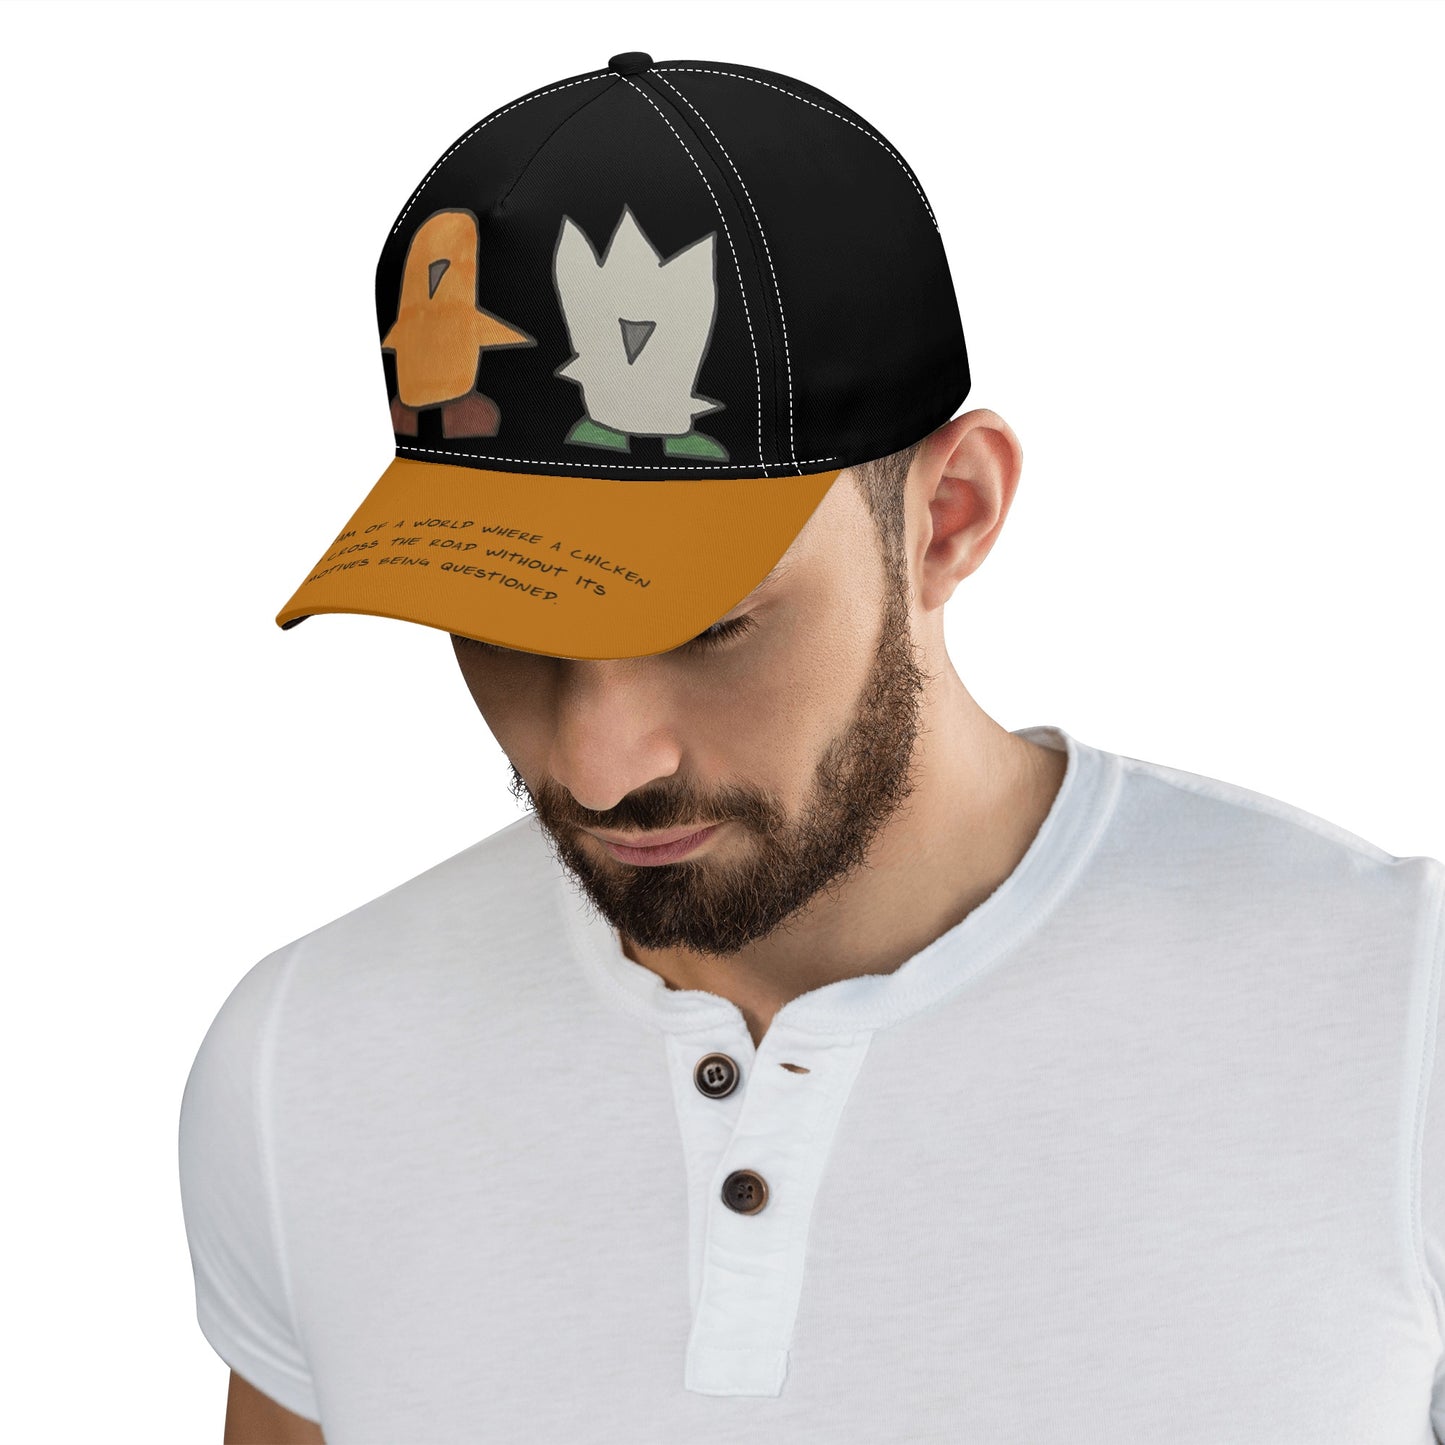 'I dream of a world' Baseball Cap in Black/Tan with Fuzzy and Muffin artwork by D.B.